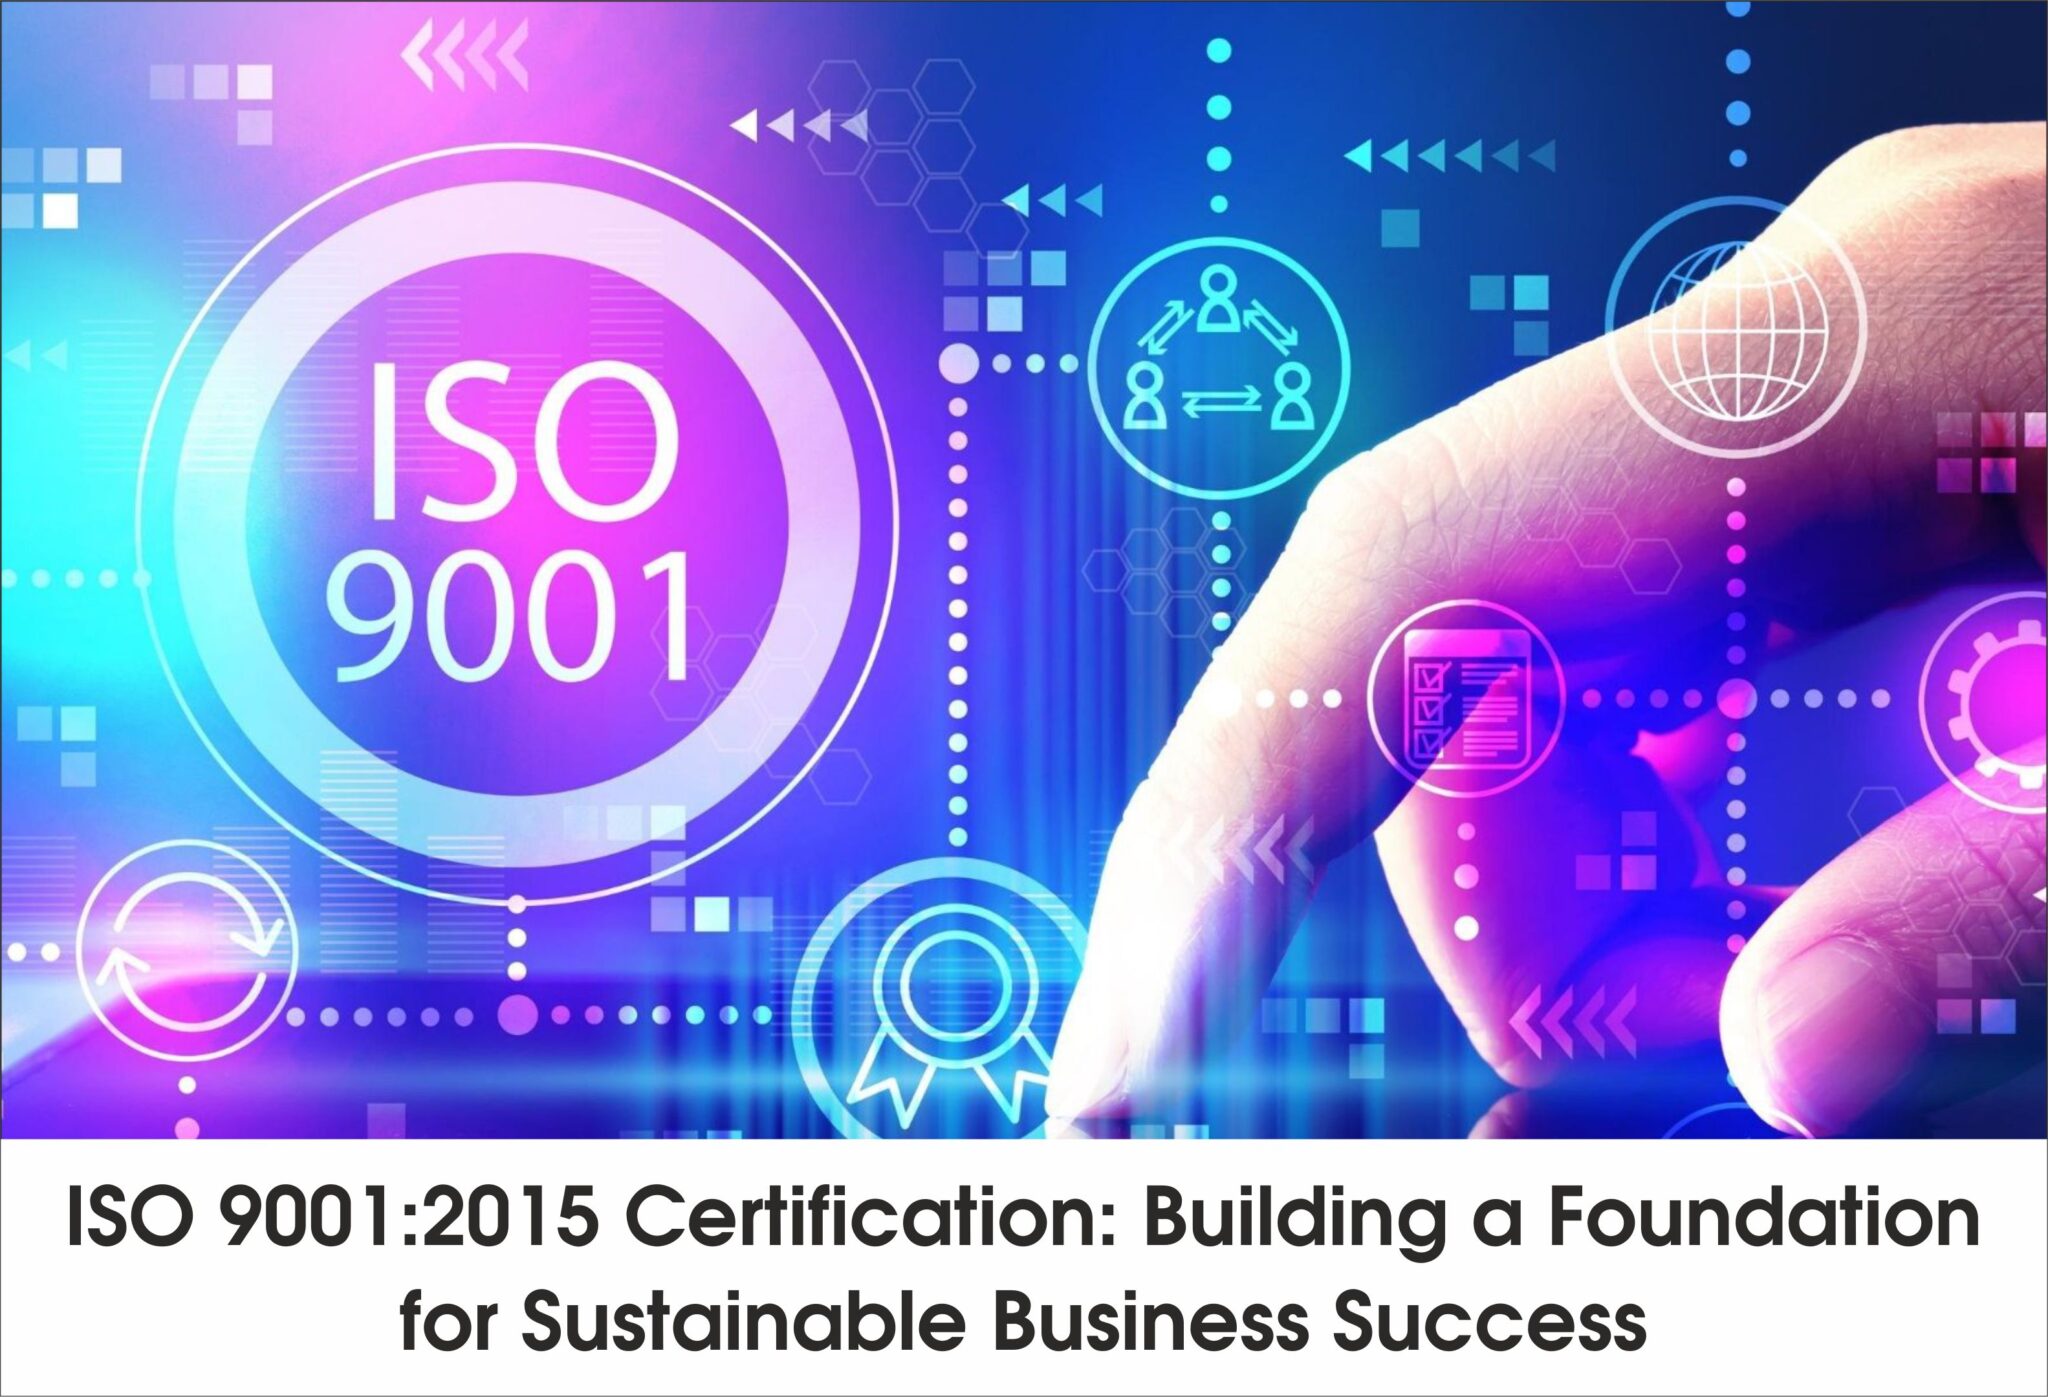 ISO 9001:2015 Certification: Building a Foundation for Sustainable Business Success